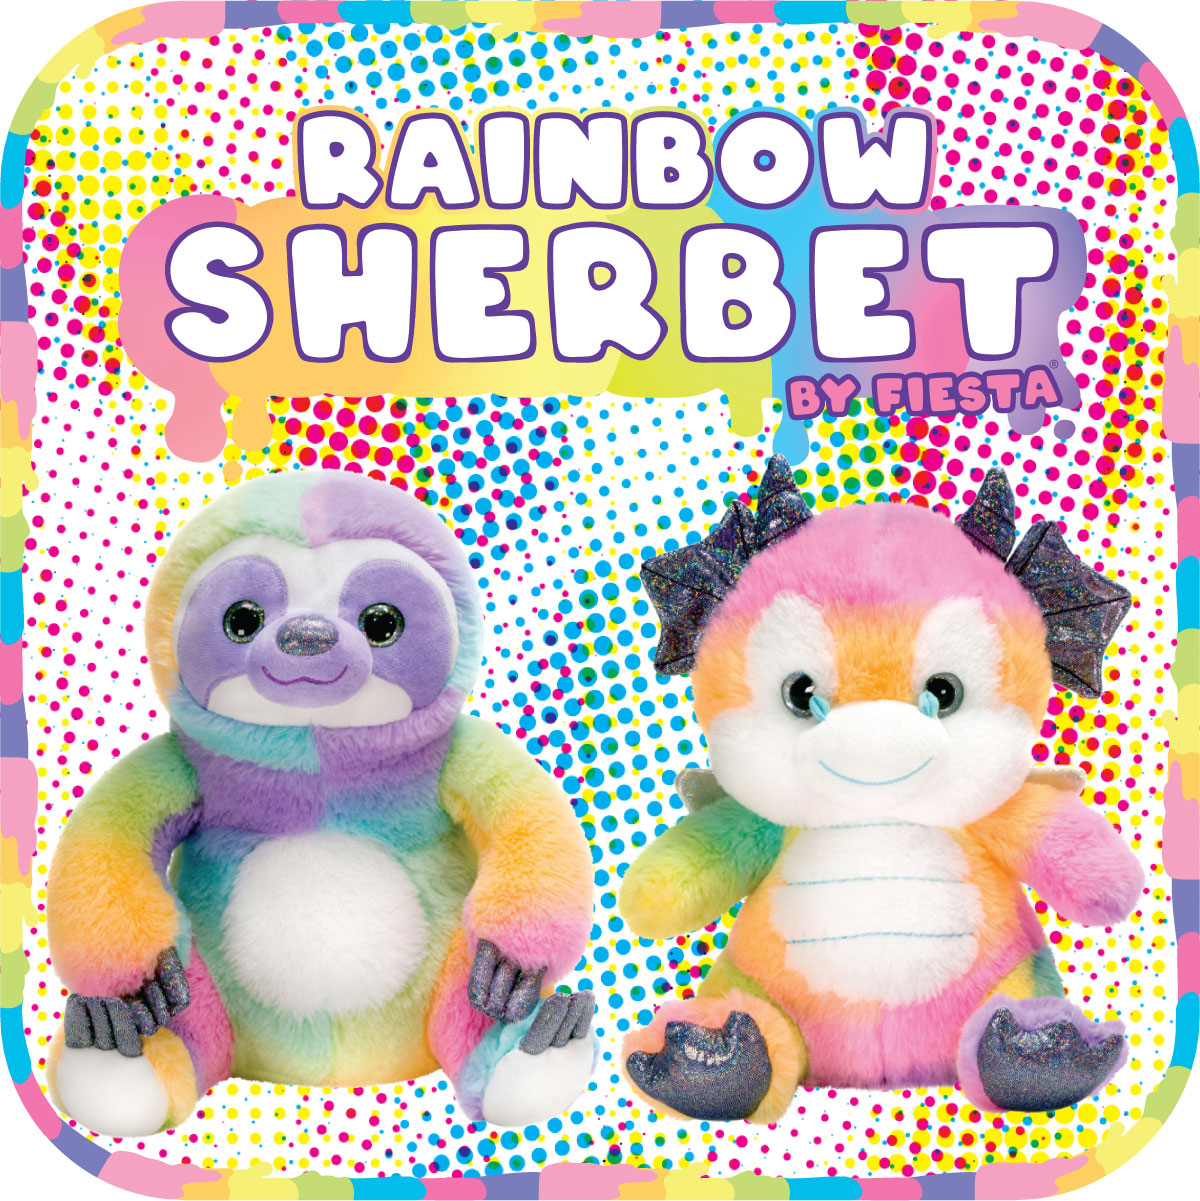 Fiesta Plush Toys - Be careful with our Shifty Eyes plush